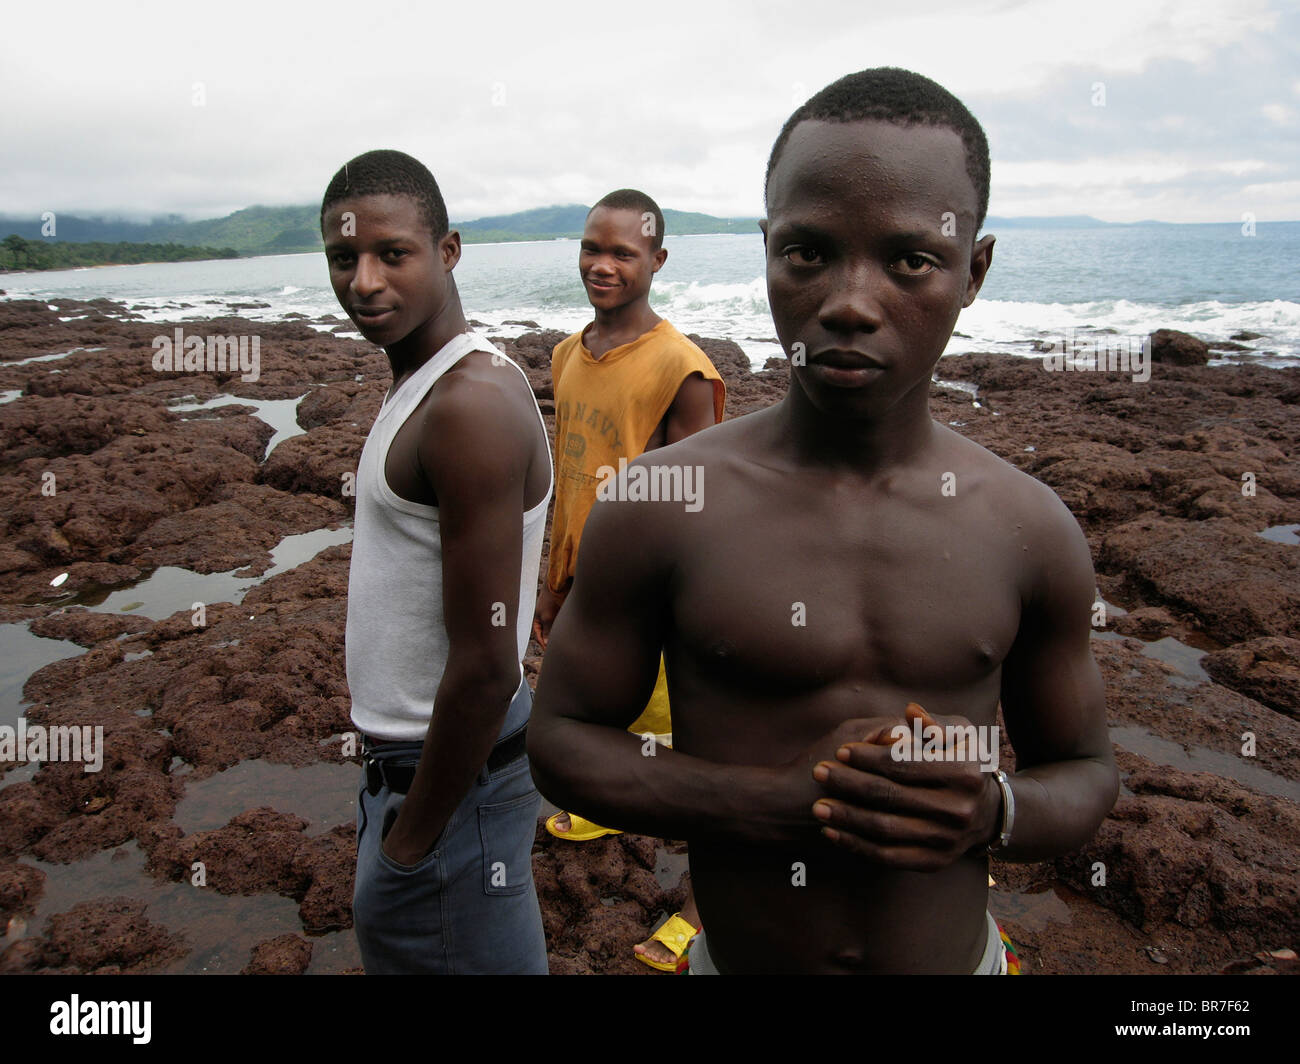 Yound Sierra Leonean men looking tough on the beach Stock Photo